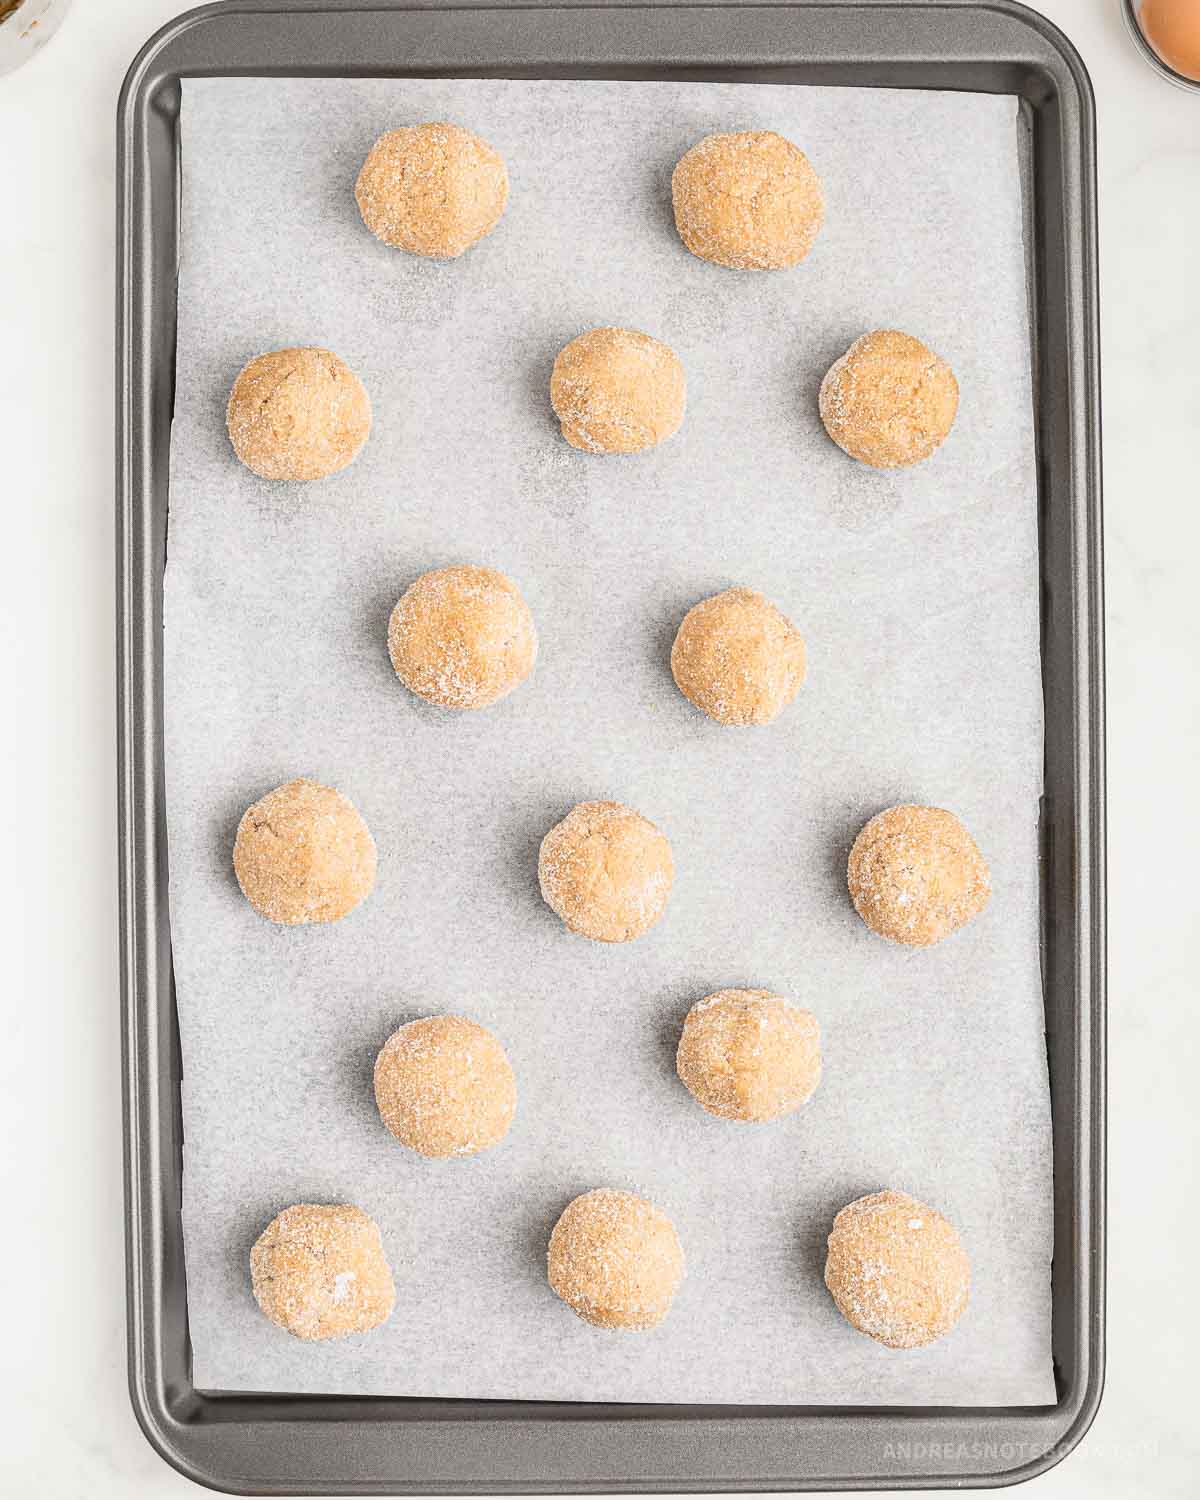 Cookie balls rolled in sugar on a baking sheet.